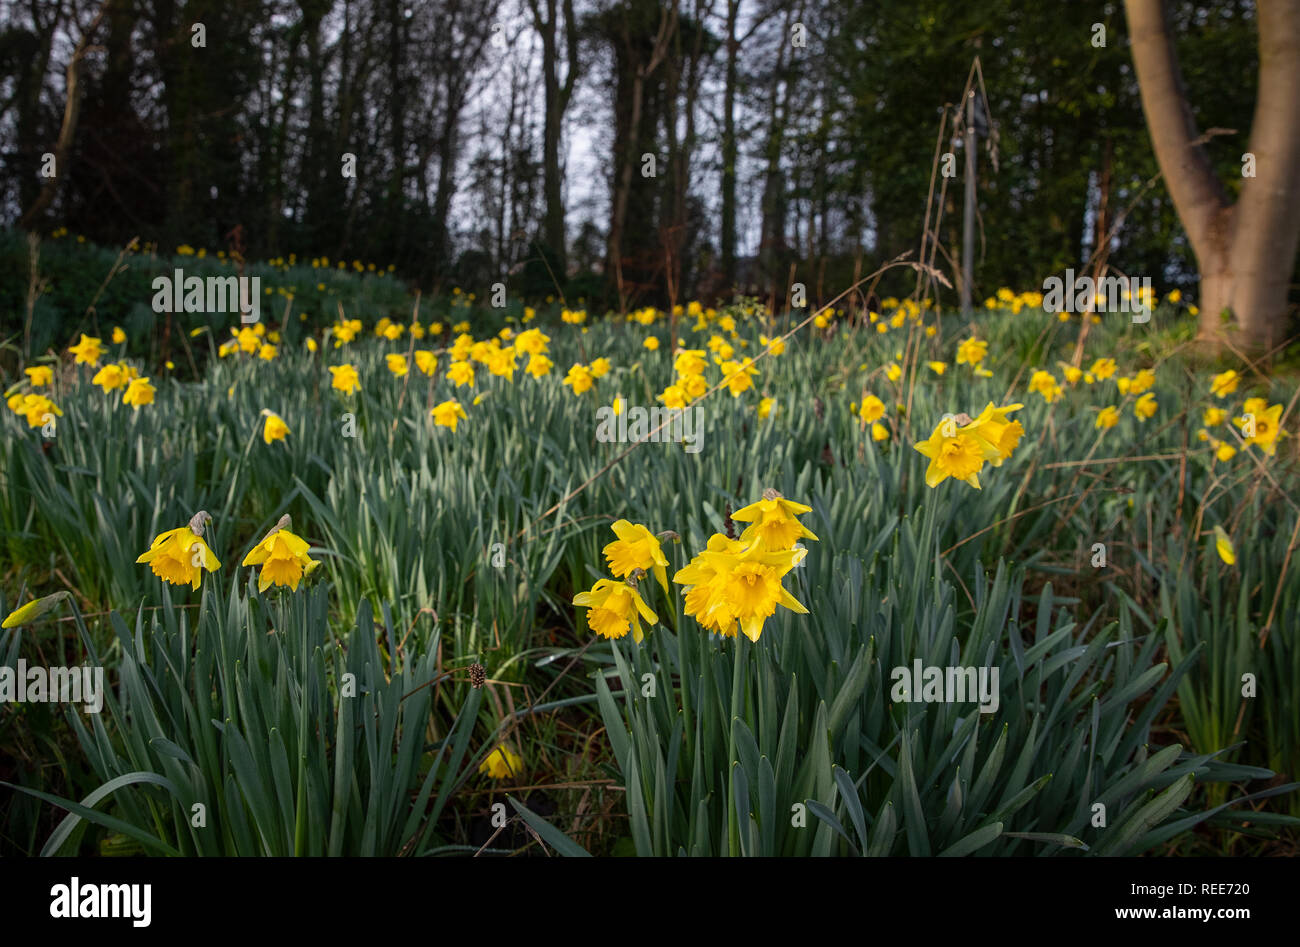 Daffodils in Woolton, Liverpool, which have bloomed early due to an earlier spell of milder weather. Stock Photo